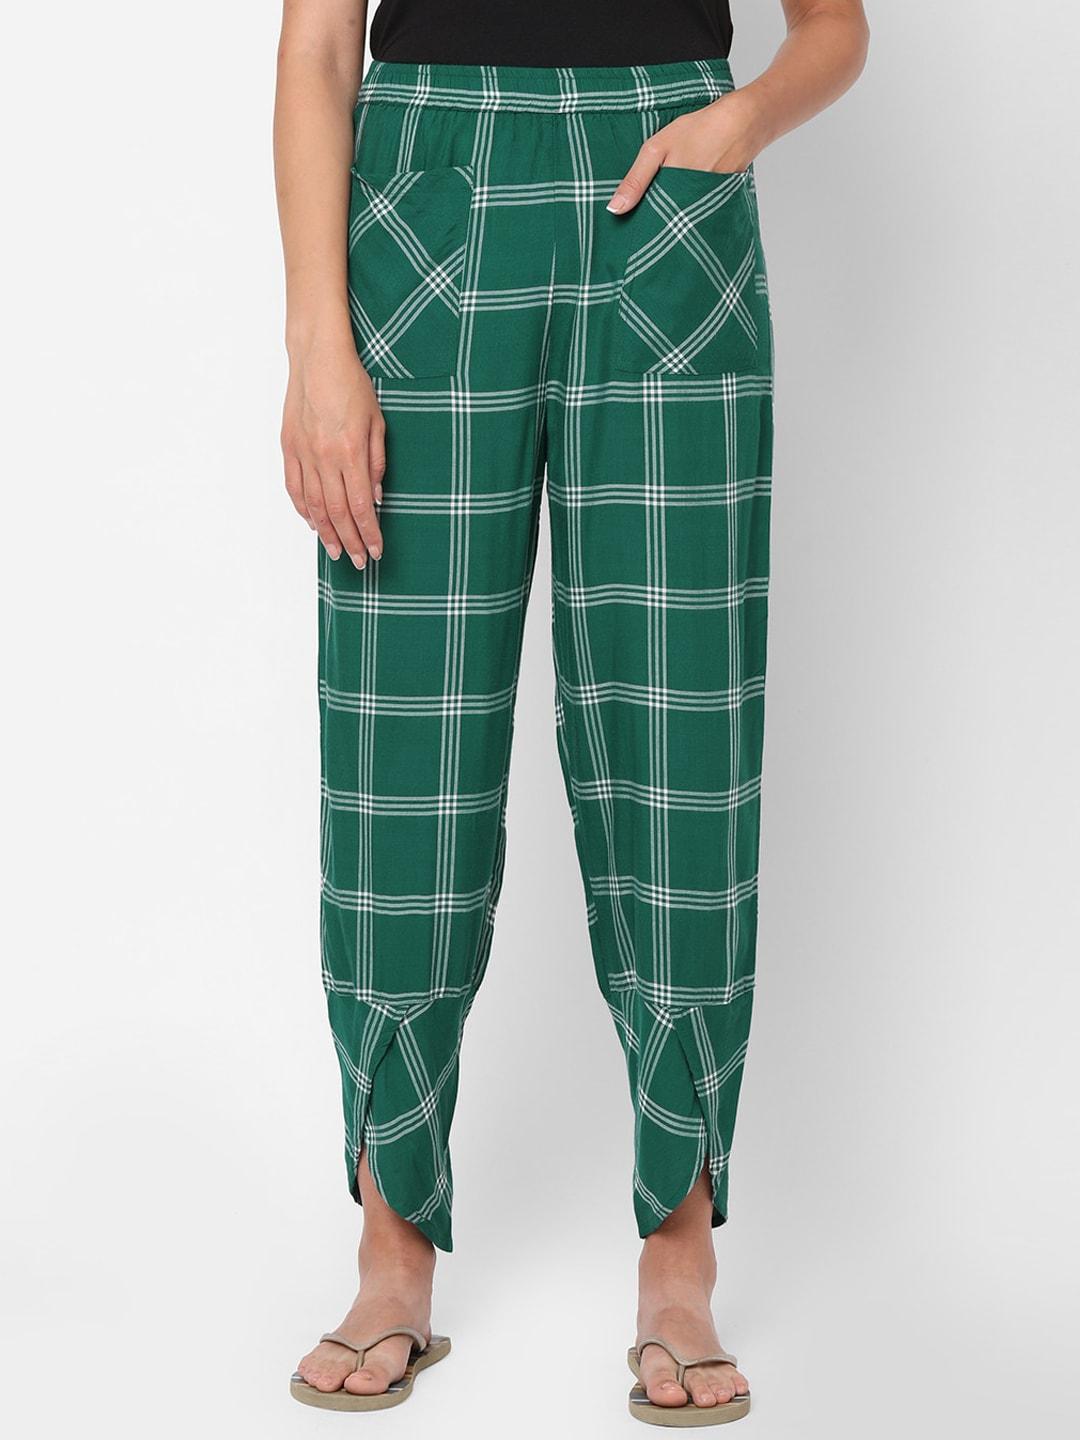 mystere-paris-green-comfy-checked-lounge-pants